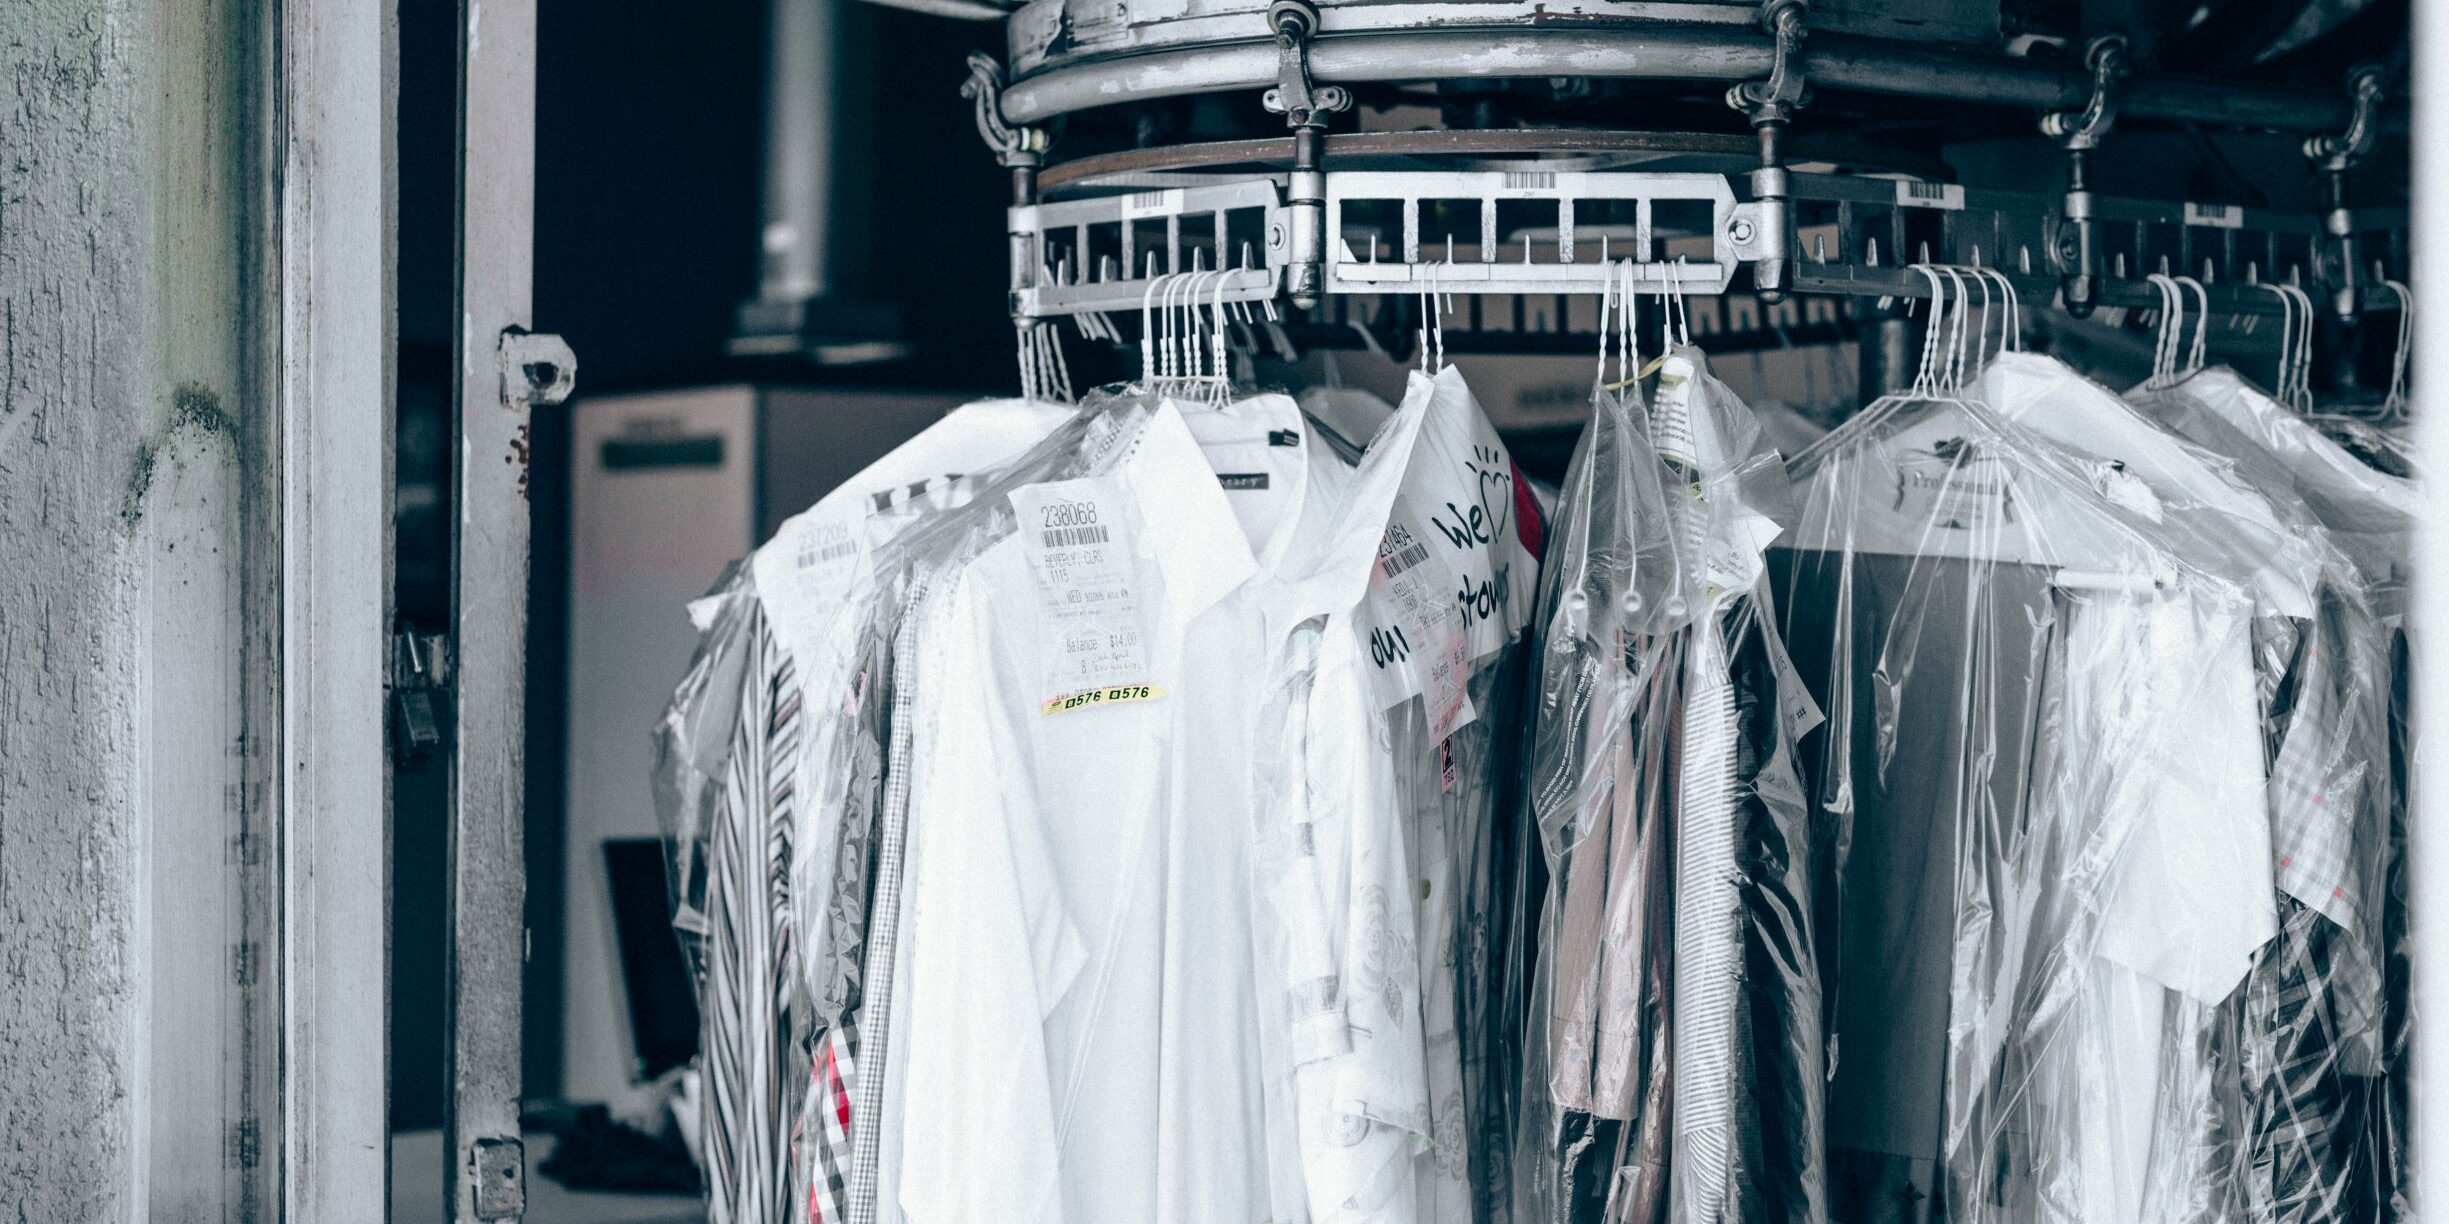 How to Start a Dry Cleaning Business - Fabricare Systems, LLC